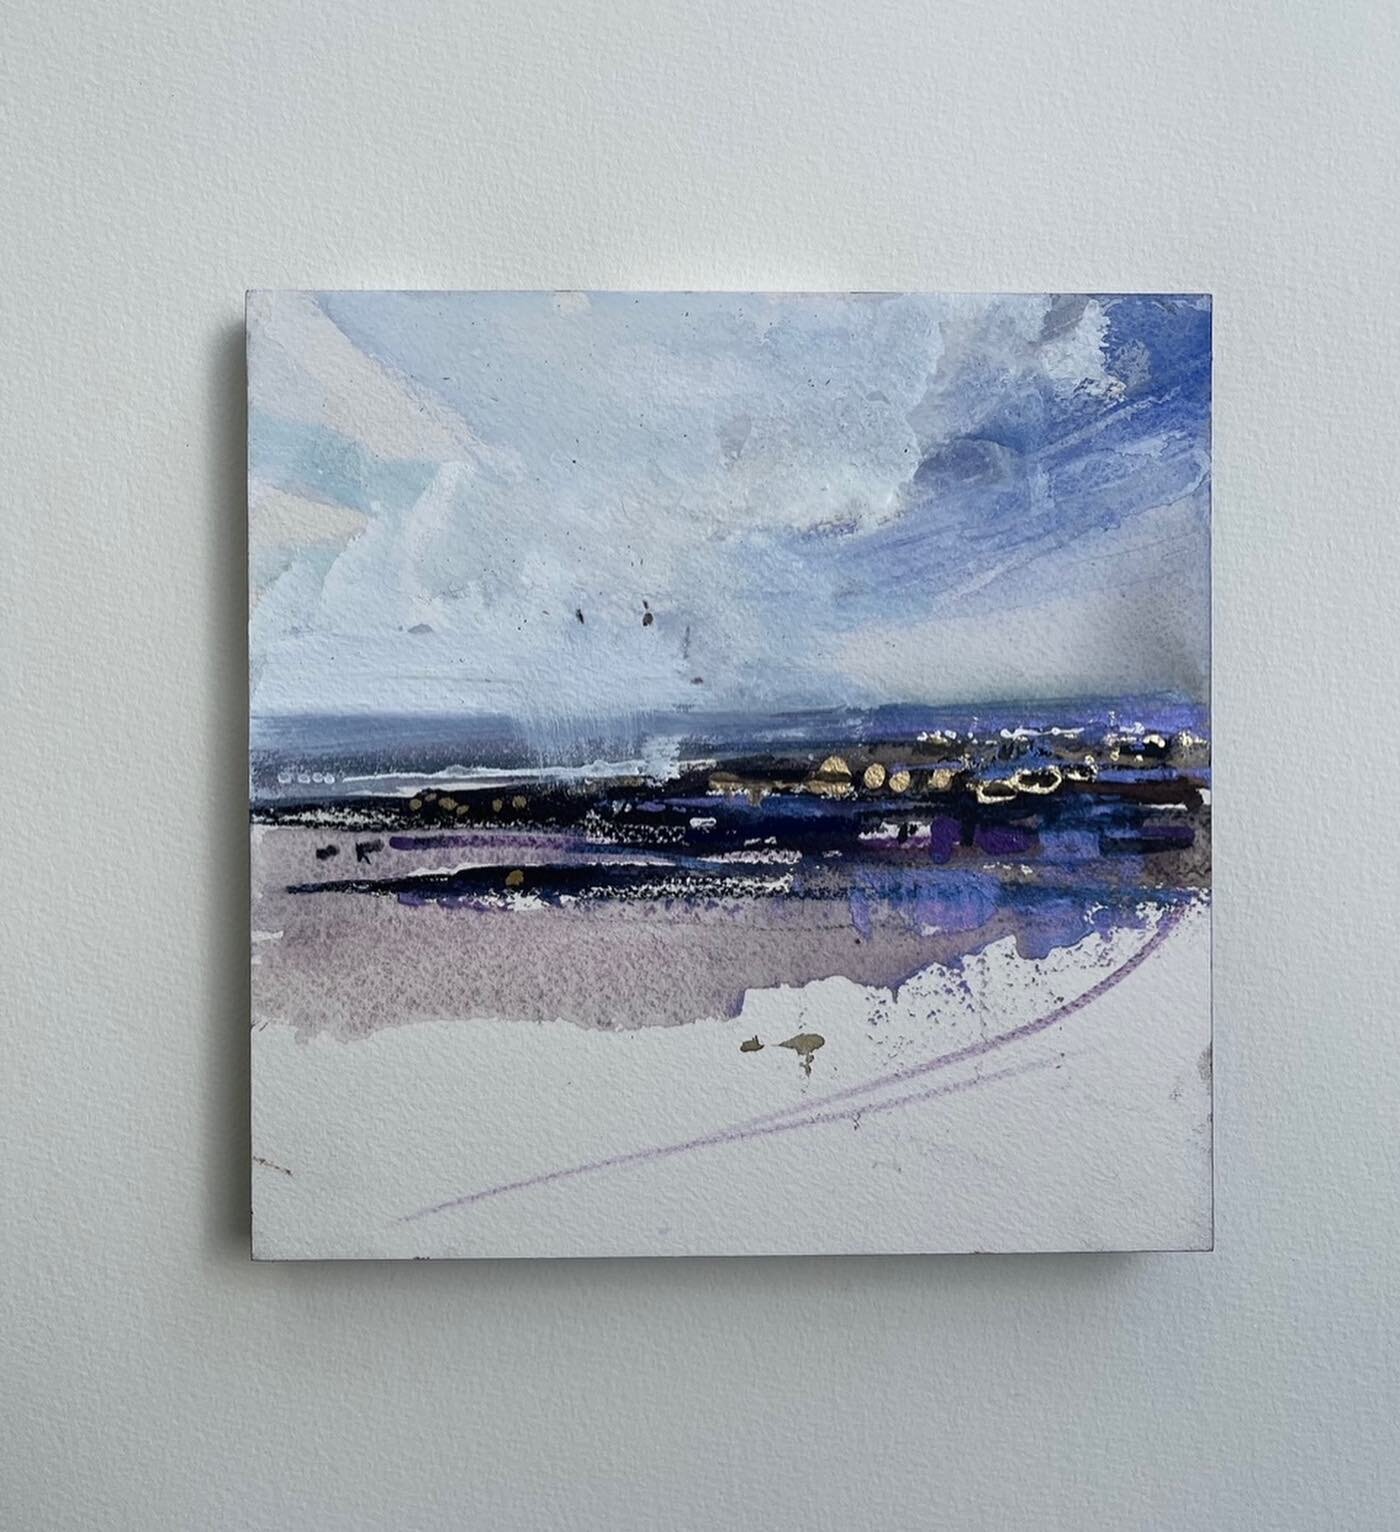 &hellip;and the boys were playing football.
31st  of March.

#painting #sea #easter #weather #enpleinair #wind #soloexhibition #landscape #watercolour #malerei #artcontemporary #scotland  #womenpainters #painting #artist #art #mixedmediapainting#pasc